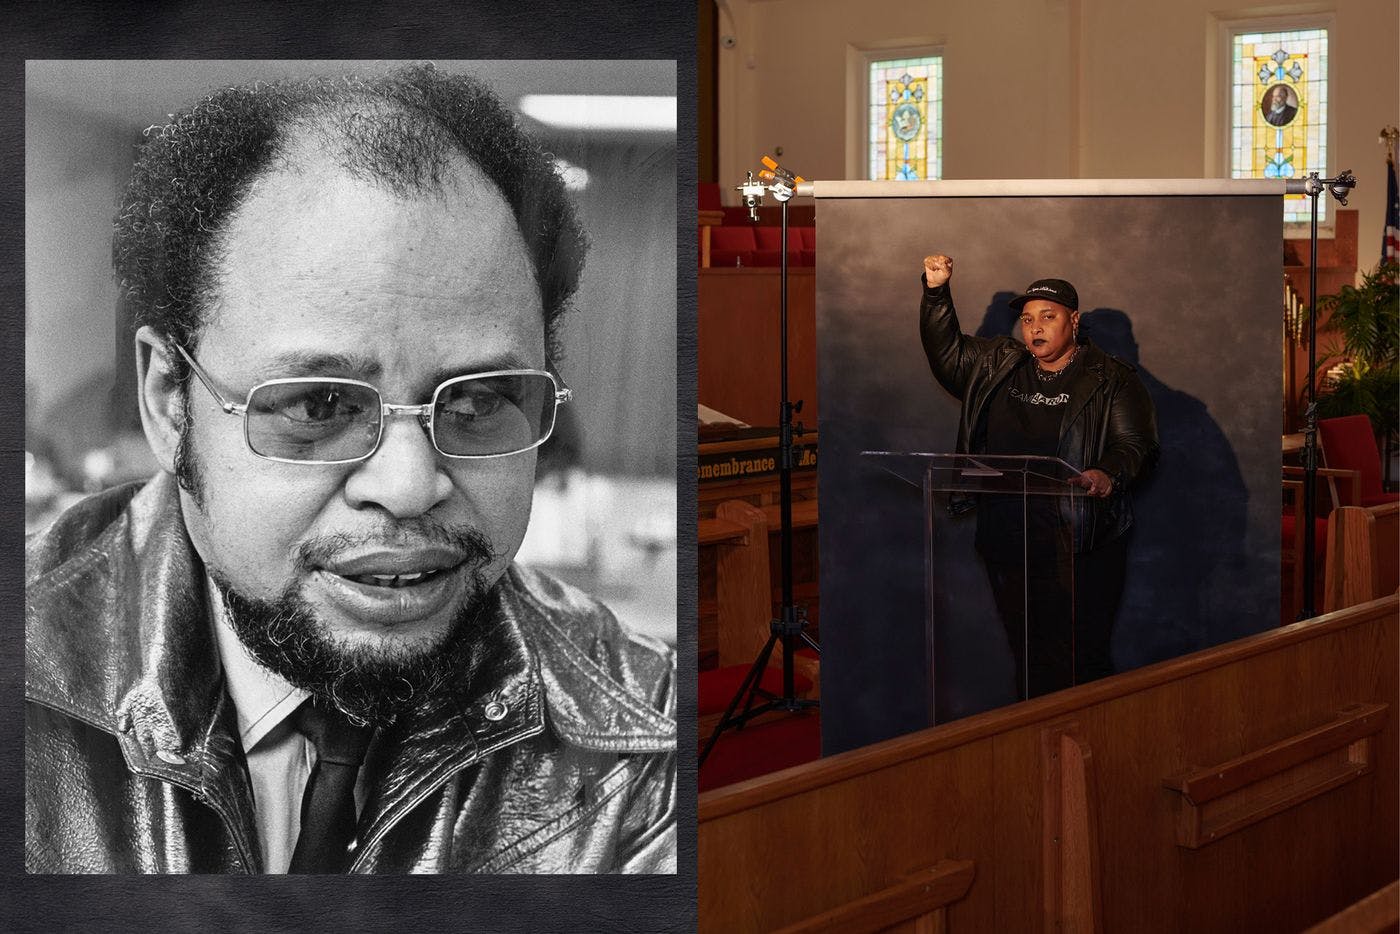 left: a black and white portrait of a man with glasses and a beard. right: a woman stands in front of a backdrop in a church with her fist raised